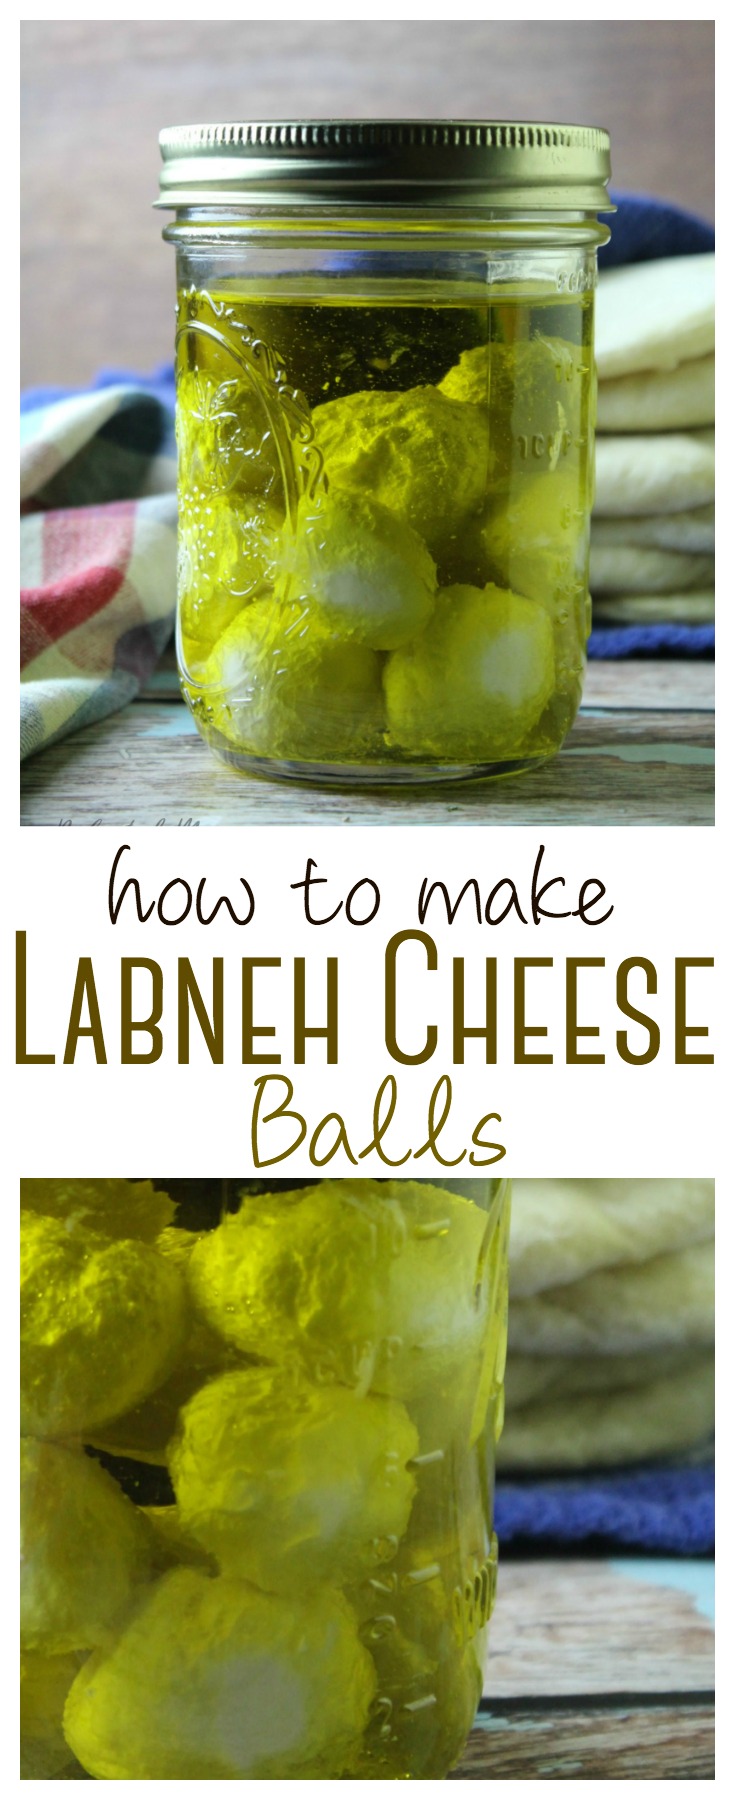 These delicious Labneh Cheese Balls are a wonderful and easy alternative to the popular Middle Eastern Labneh spread. Serve as part of a mezze platter.